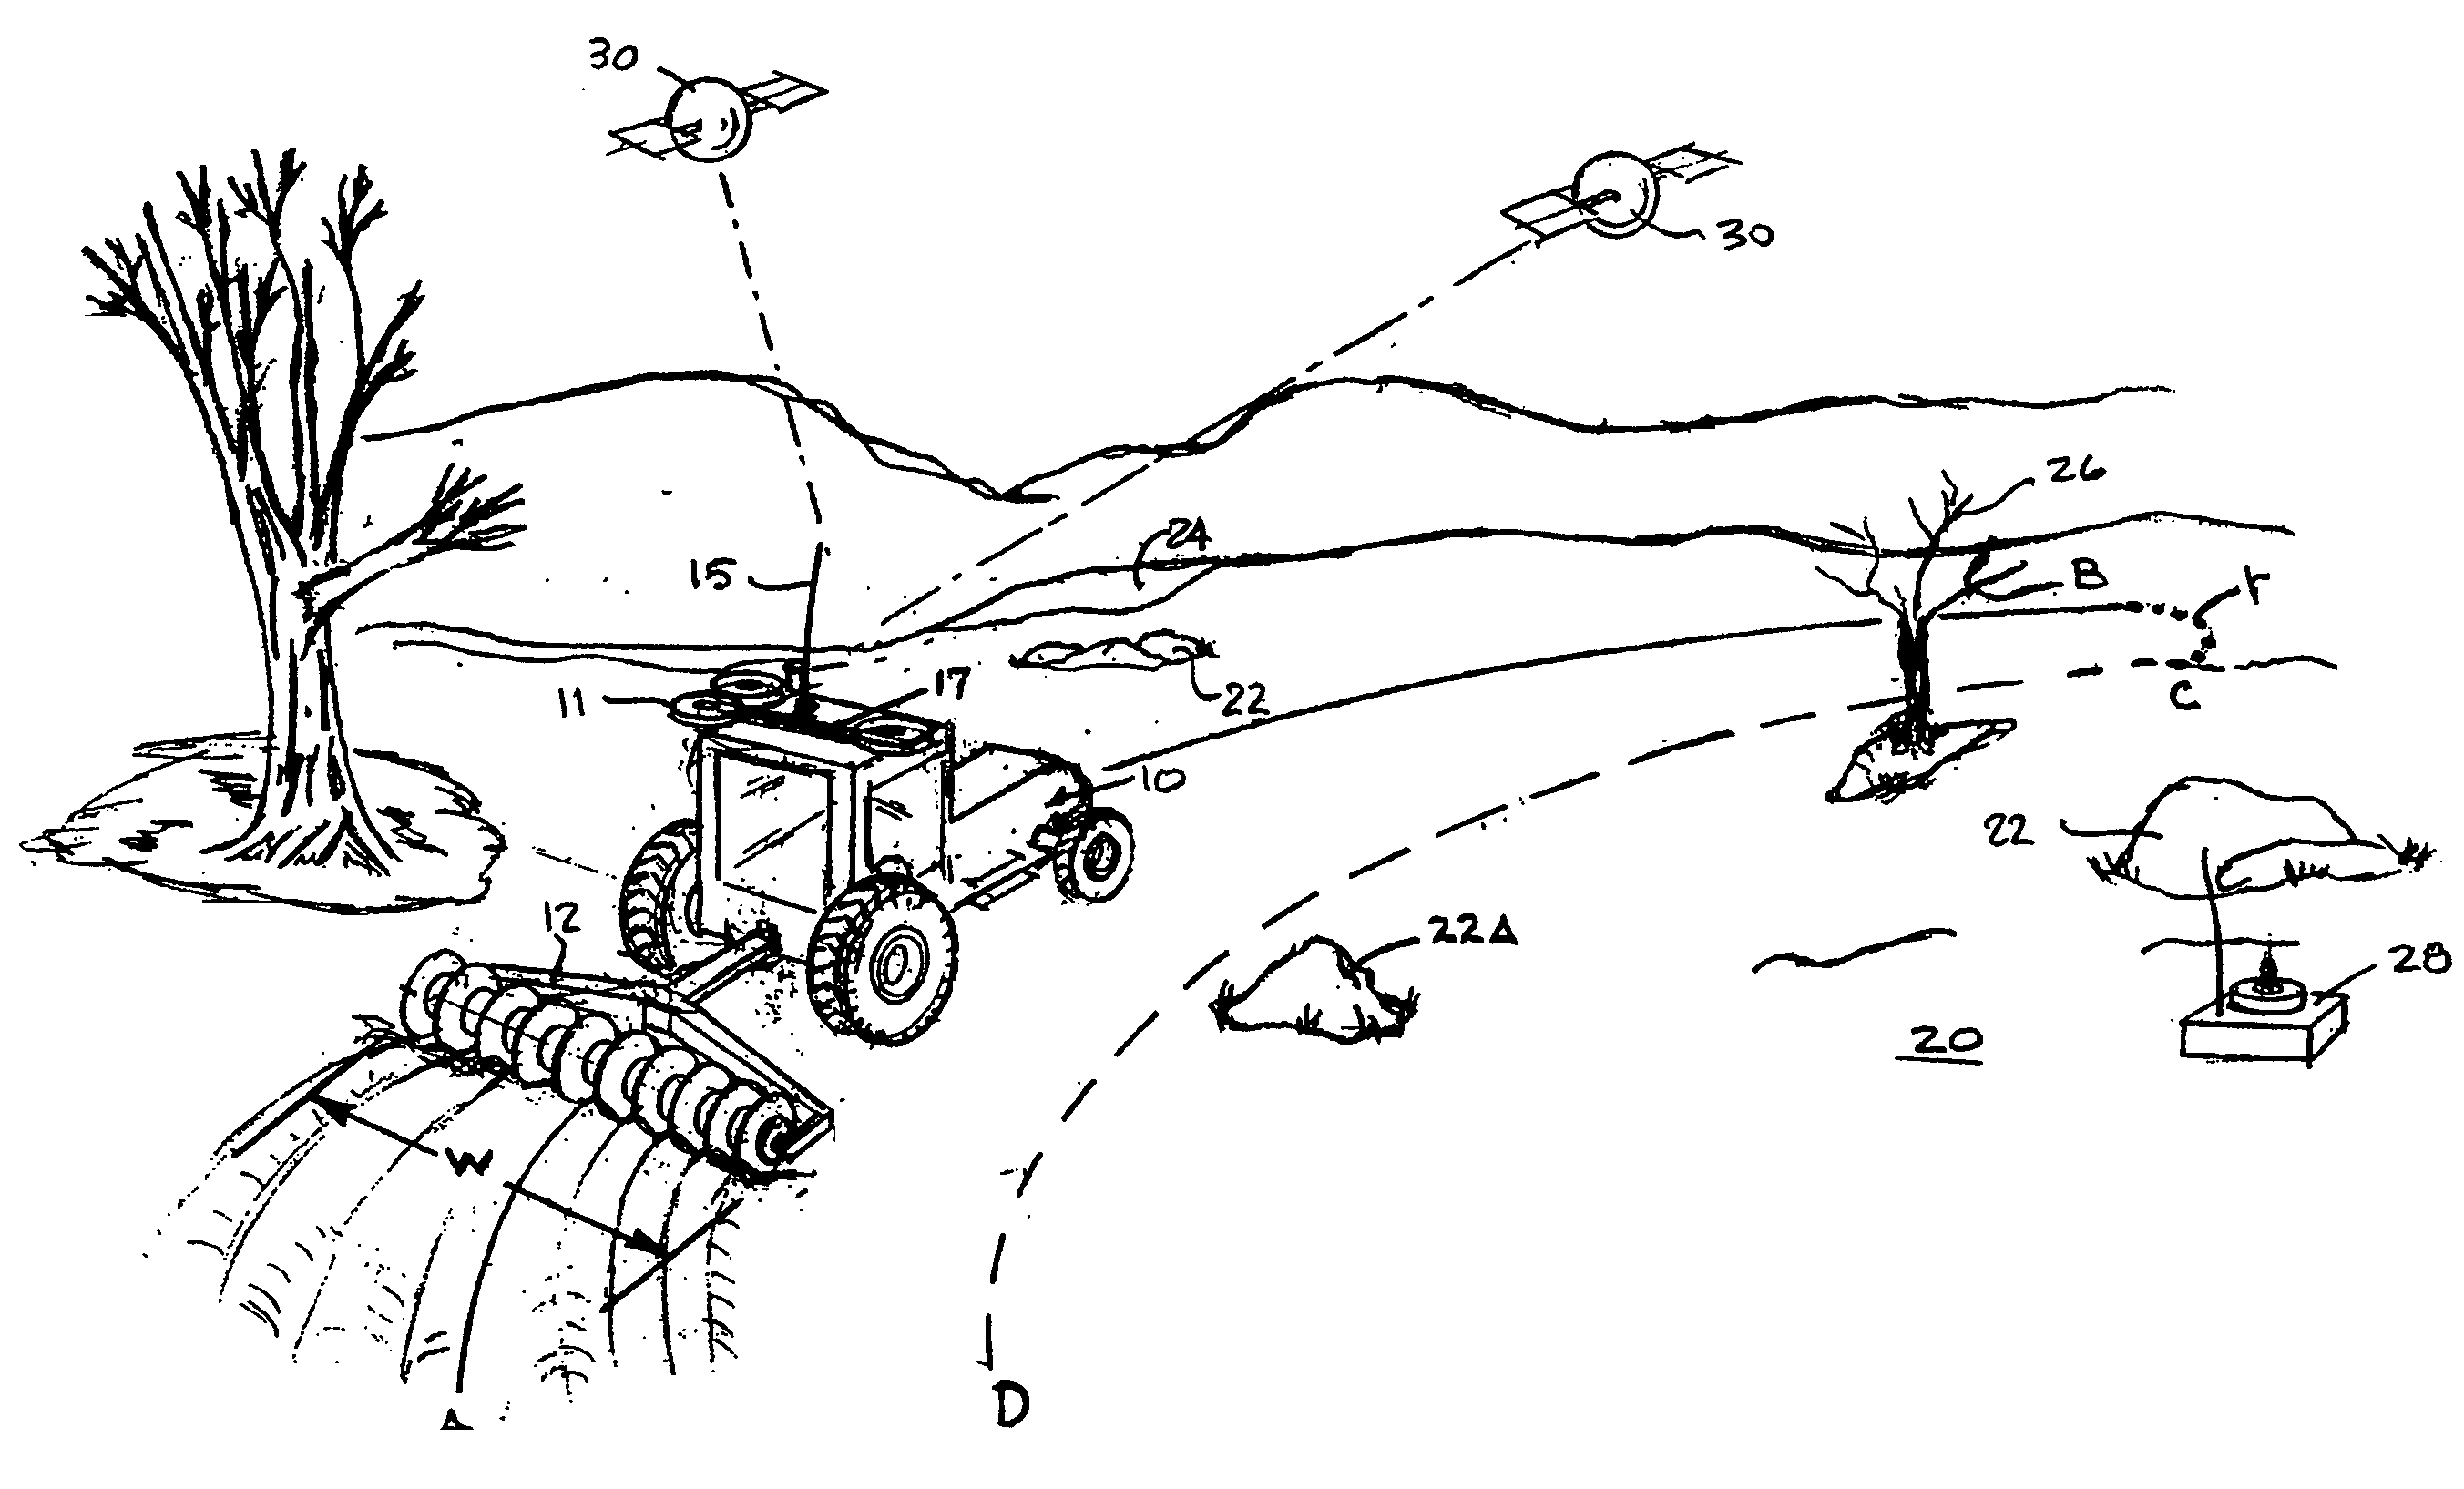 System and method for interactive selection of agricultural vehicle guide paths through a graphical user interface other than moving the vehicle